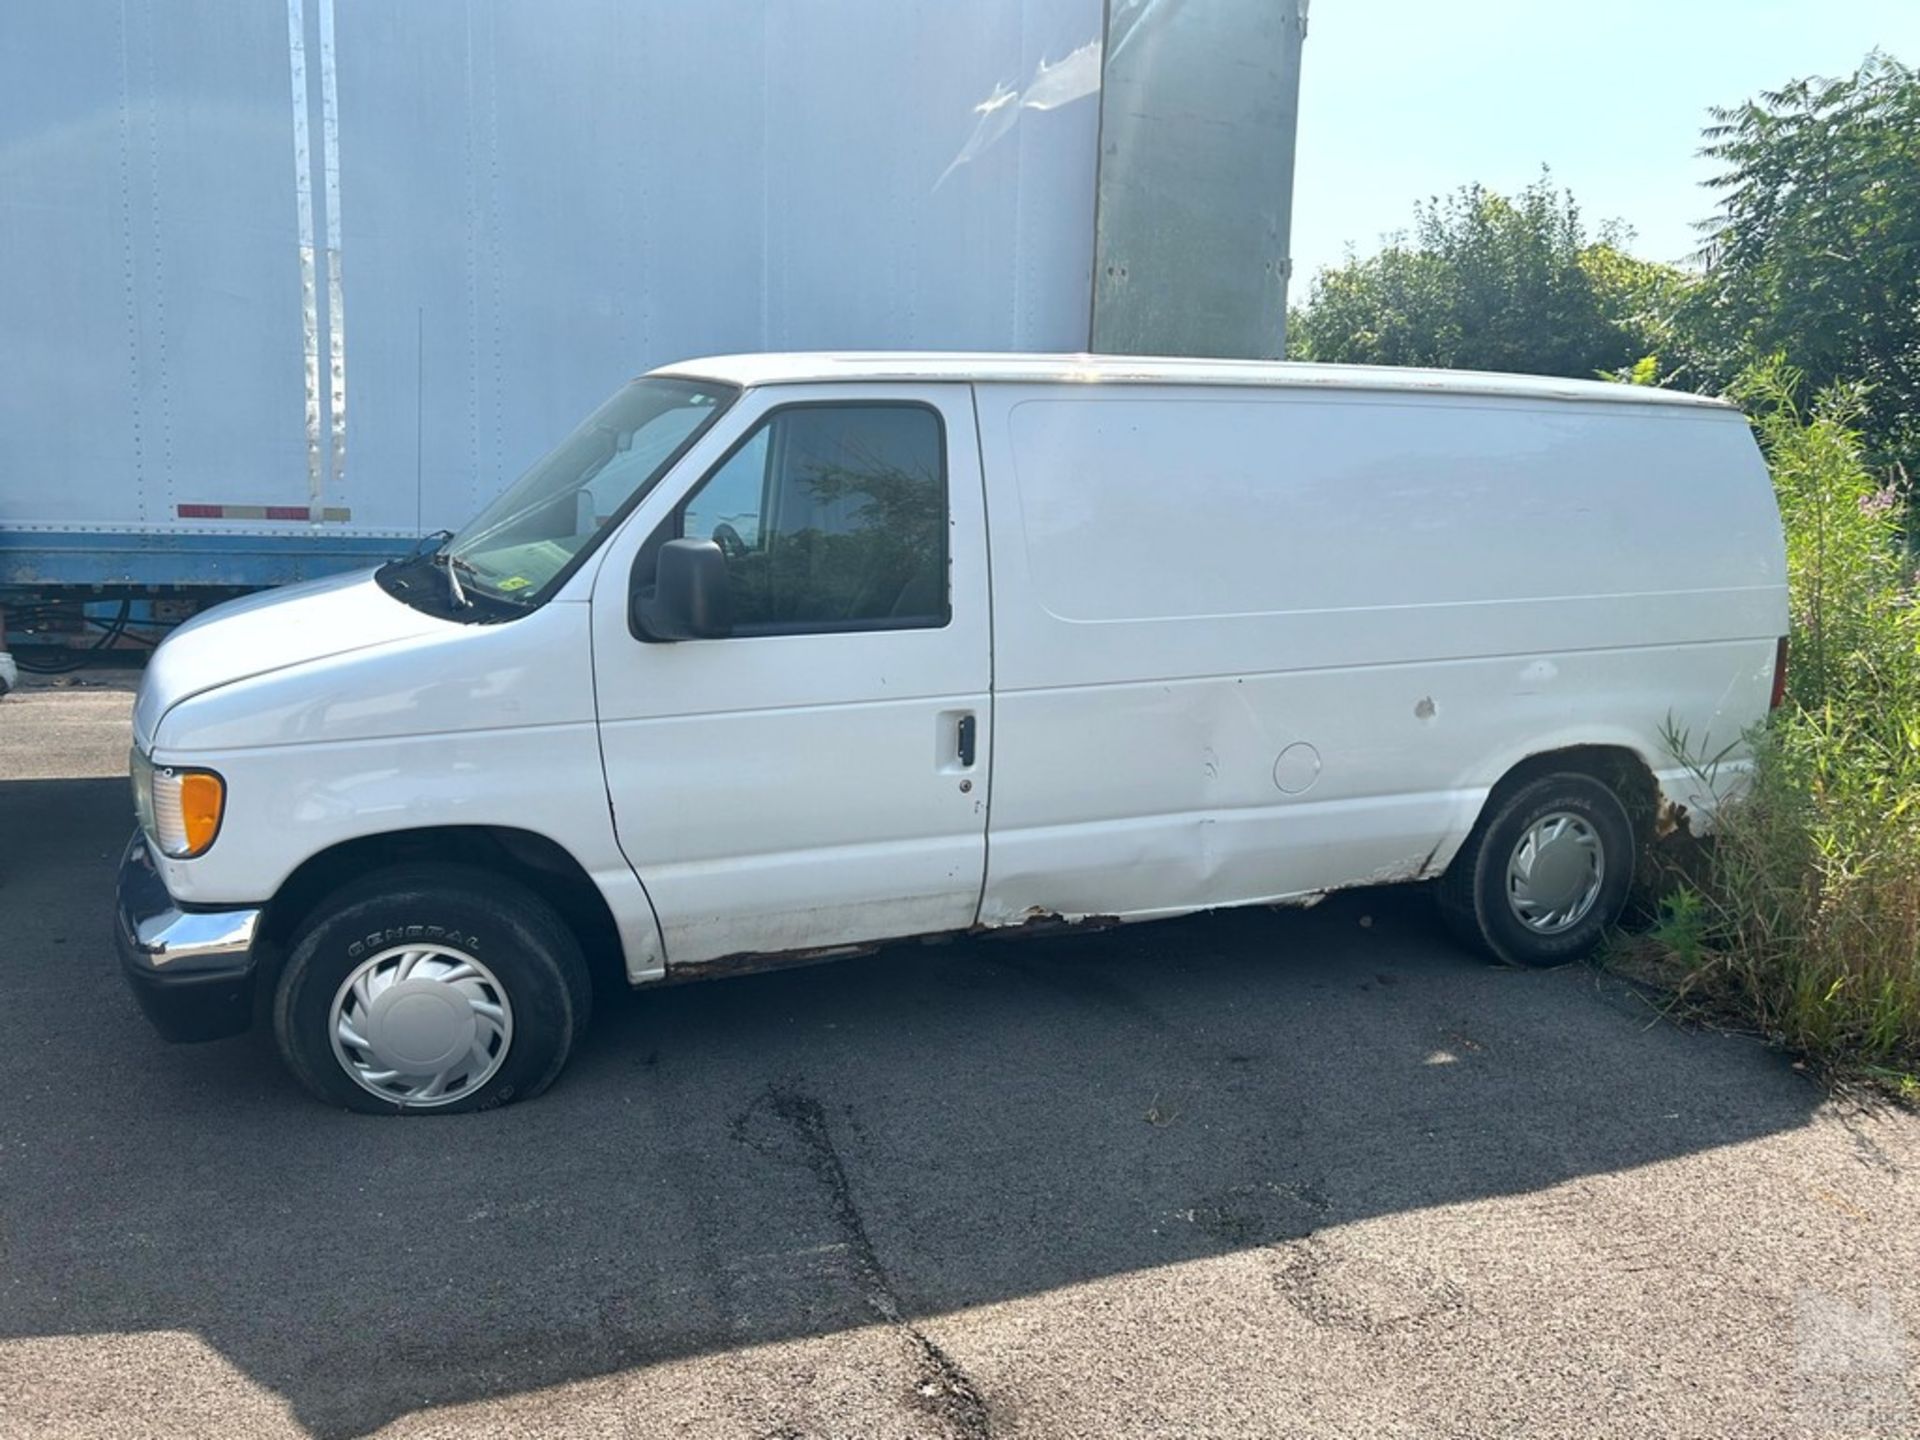 2002 FORD E150 VAN VIN: 1FTRE14253HA58959 369, 389 MILES V6 GAS 2WD NOT RUNNING WITH TITLE AND KEYS - Image 3 of 8